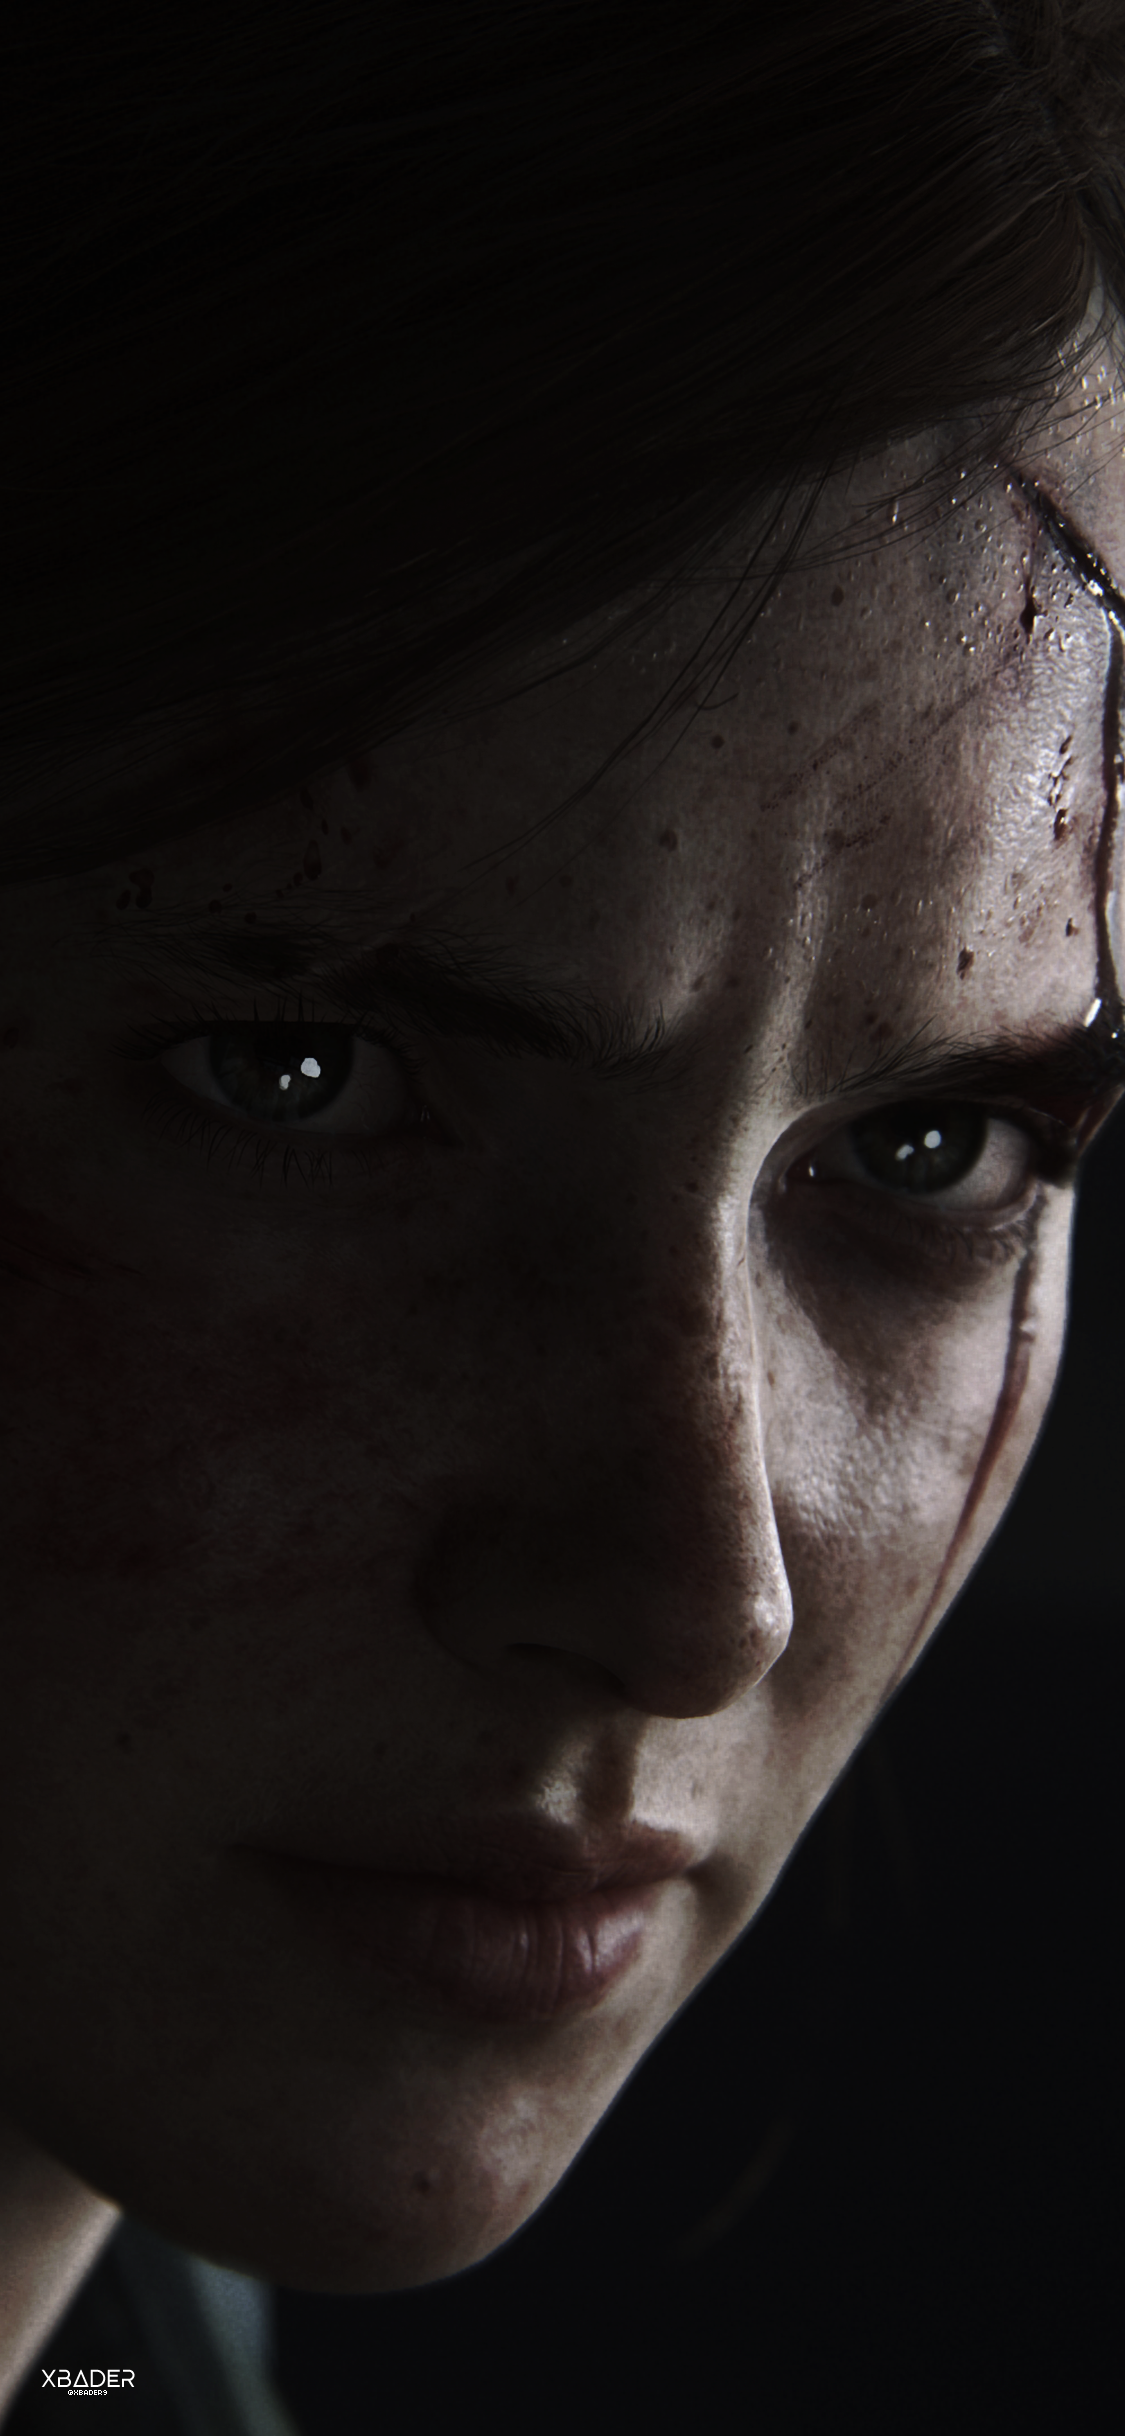 The Last of Us Part 2 iPhone Wallpaper Free The Last of Us Part 2 iPhone Background